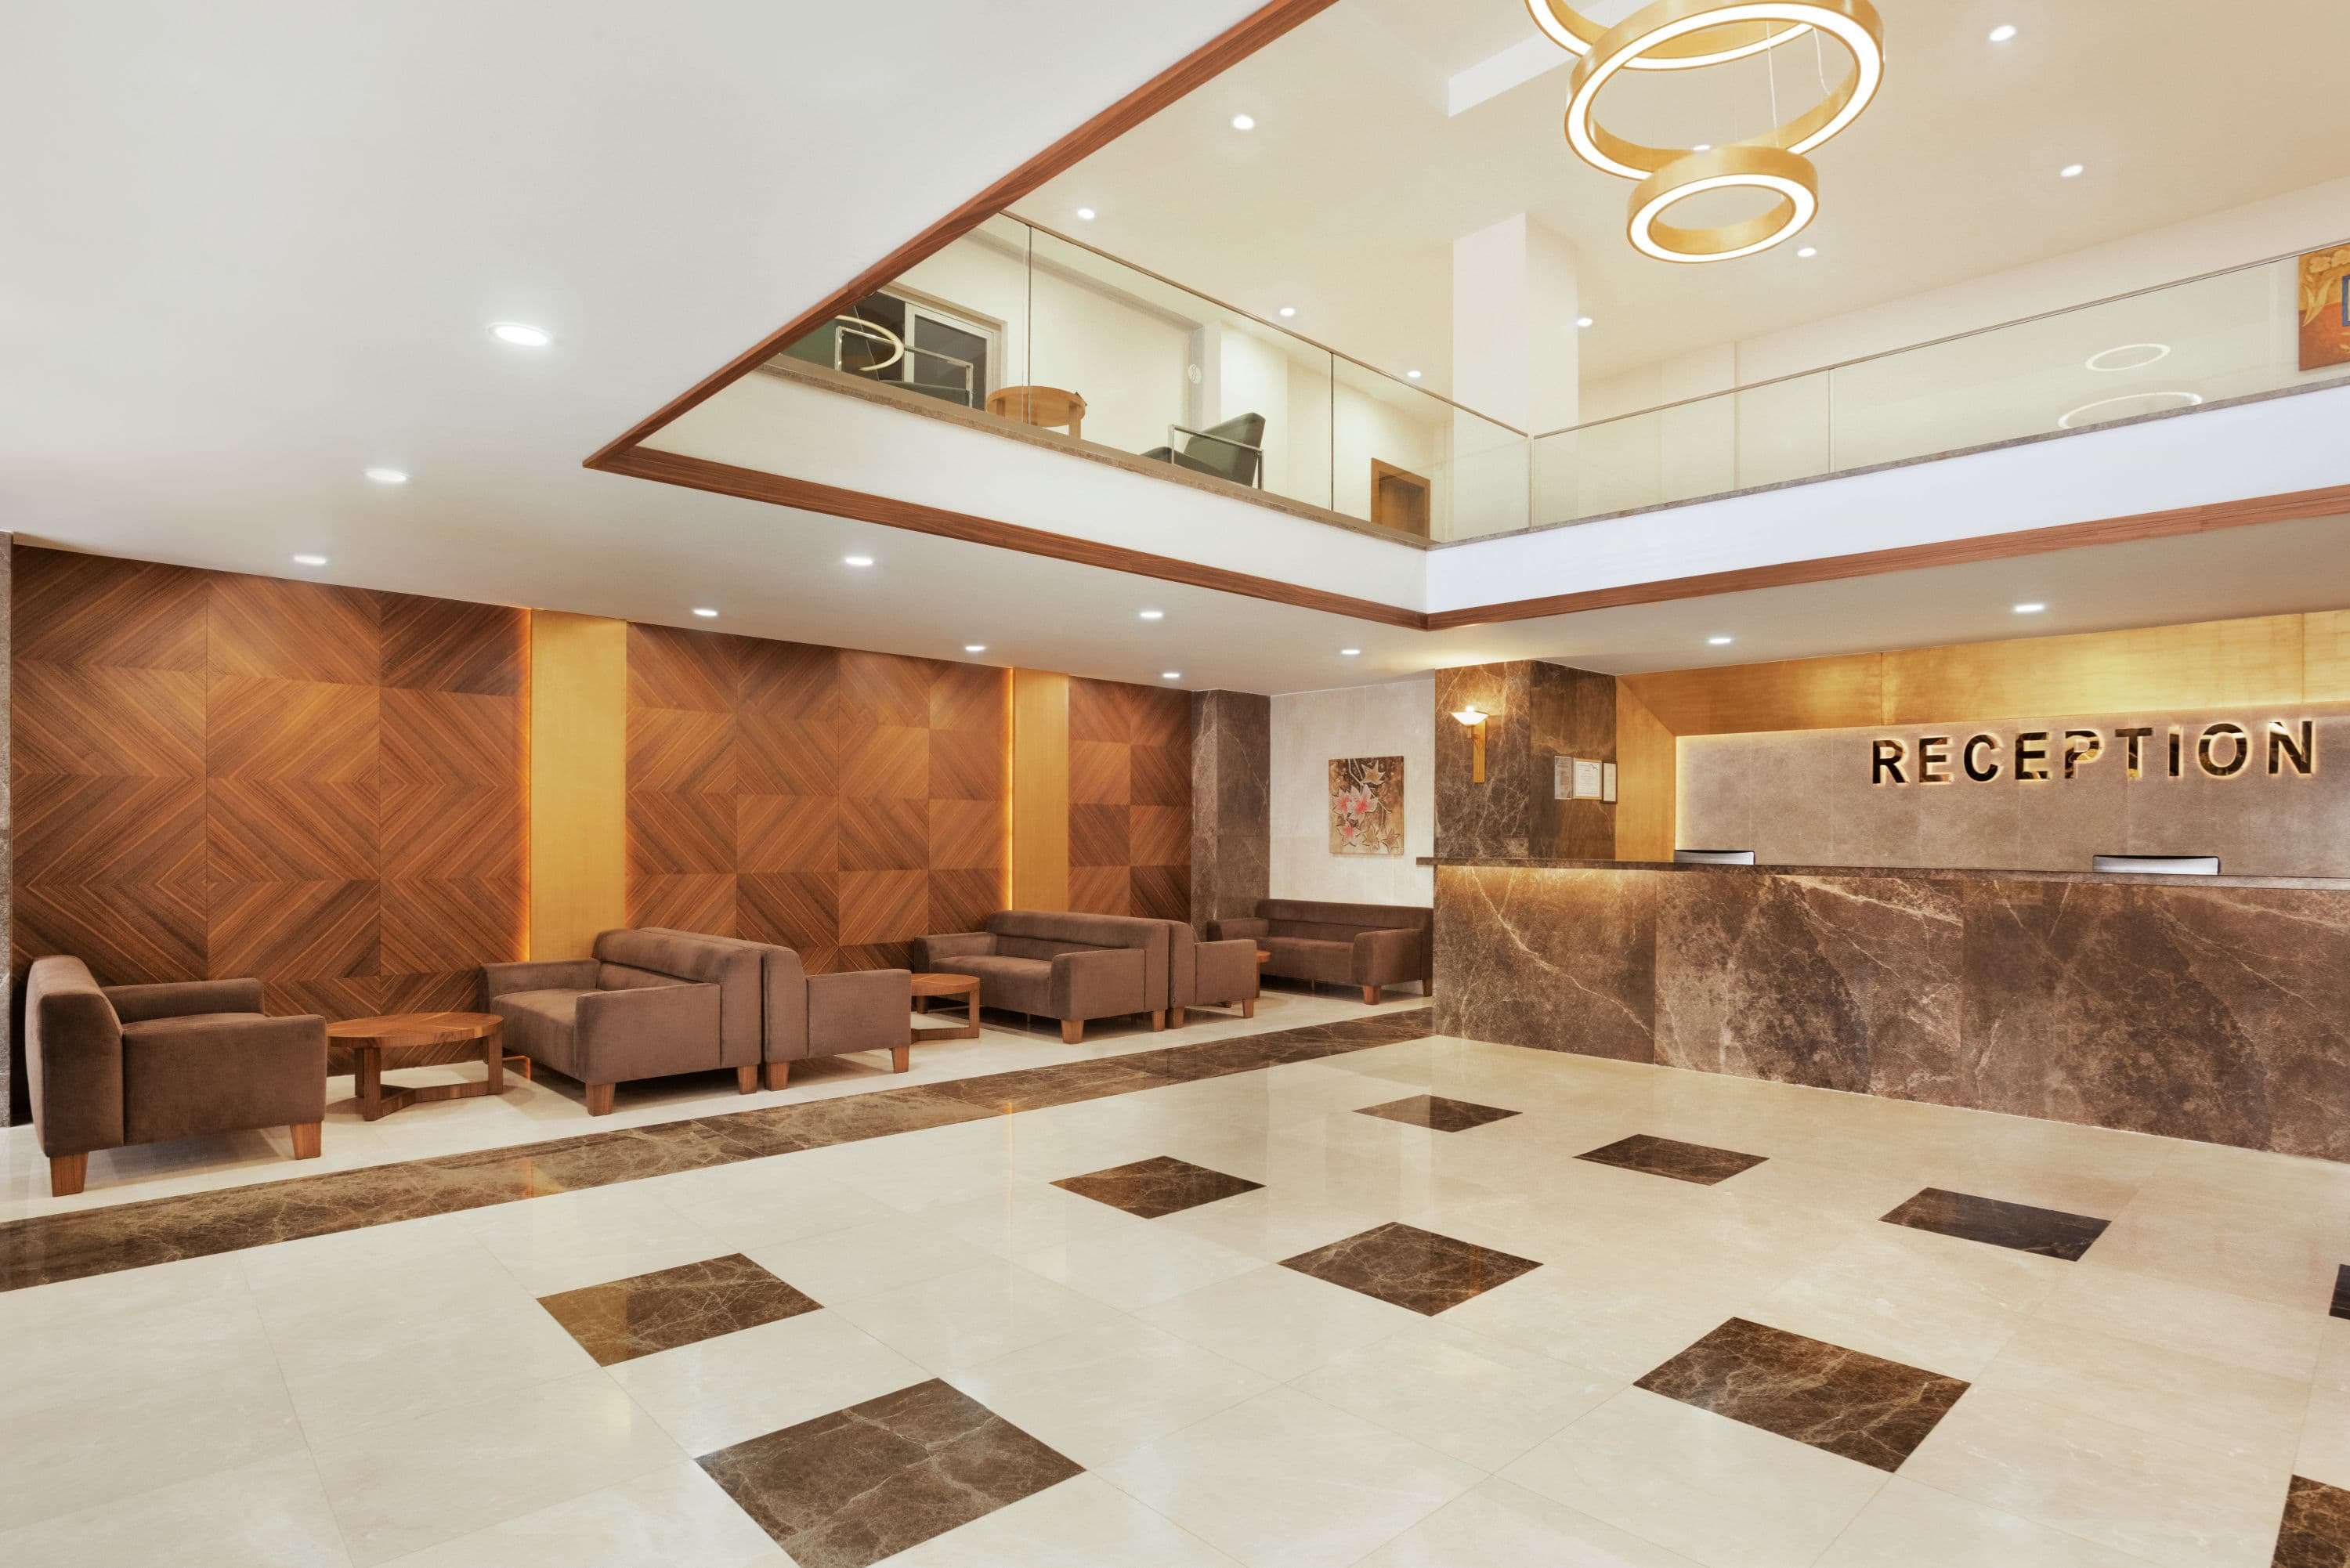 RAMADA HOTEL AND SUITES BY WYNDHAM